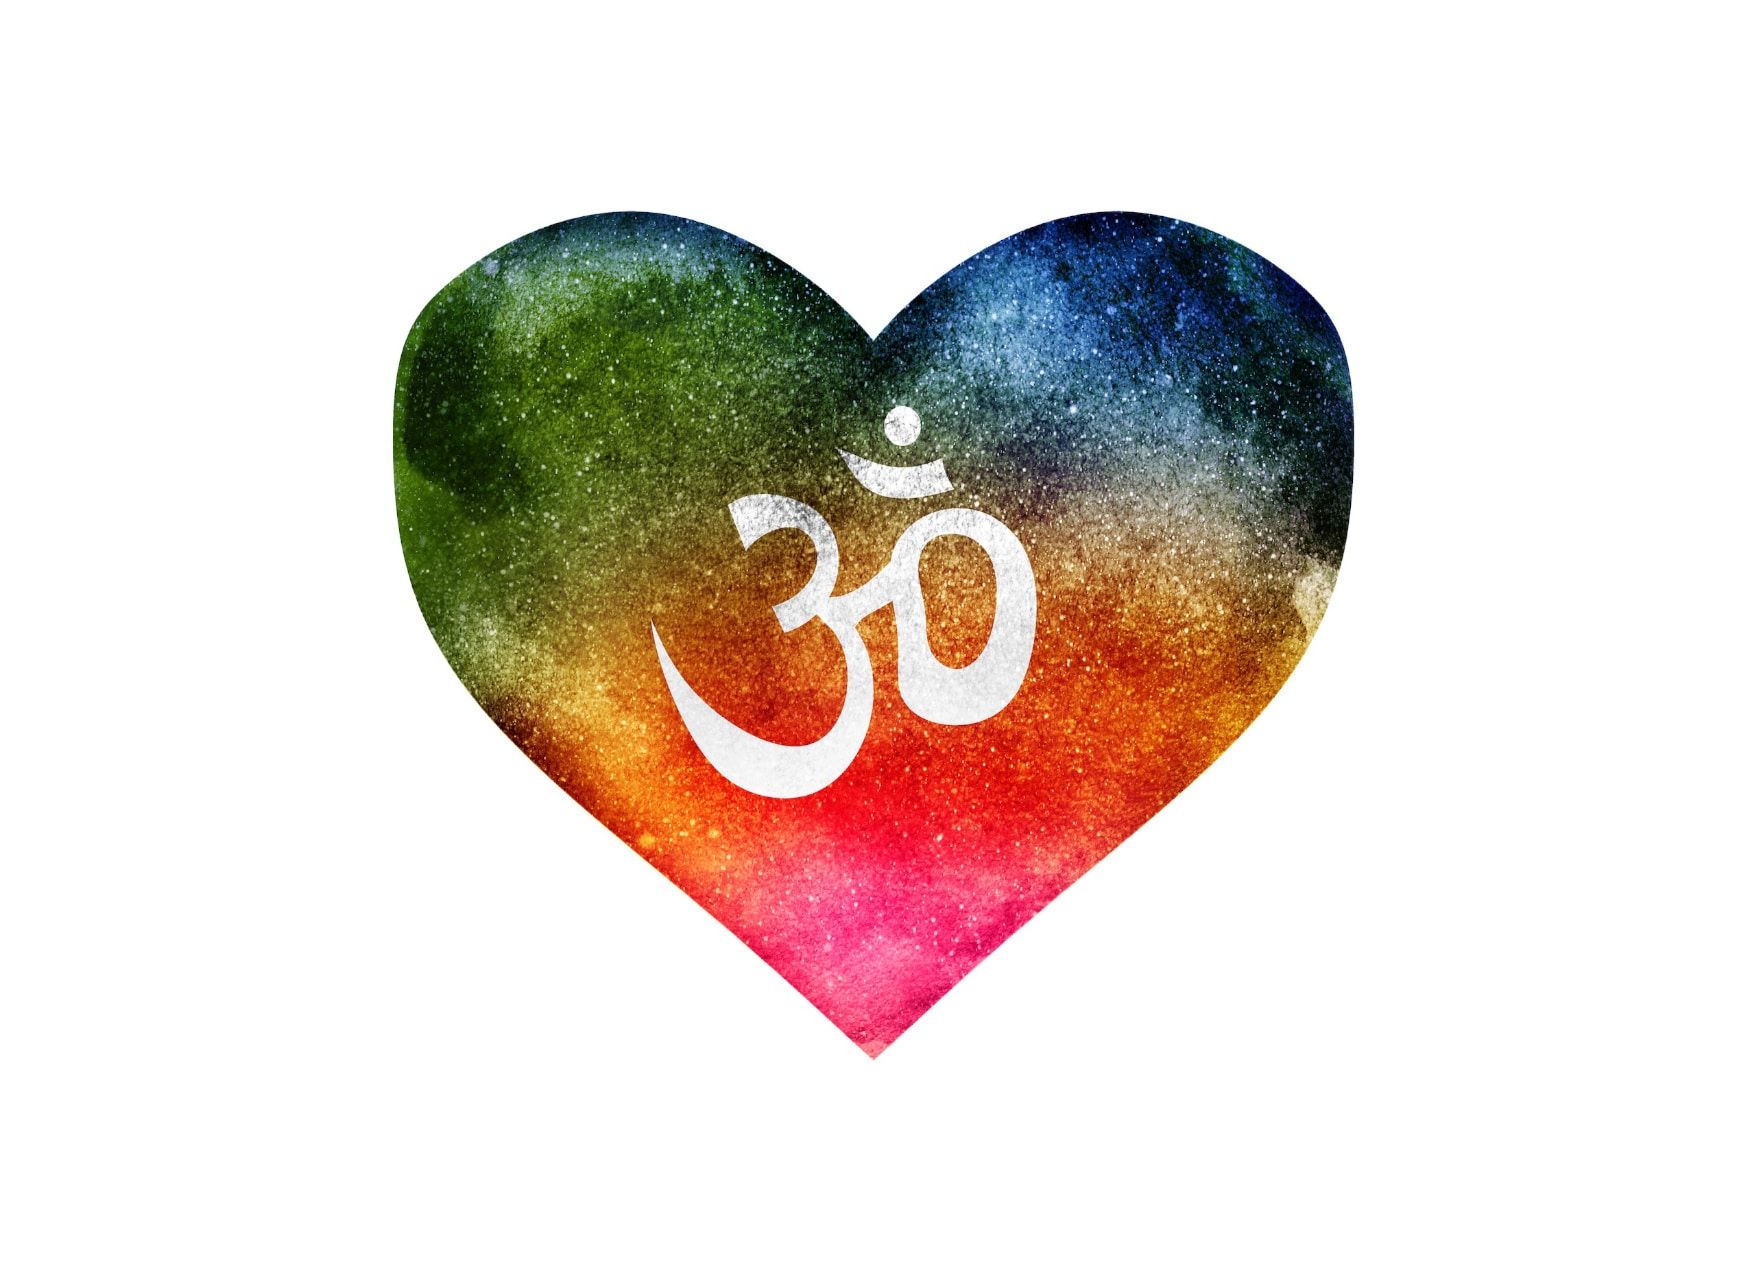 The path to om: fix the present – part 2 1